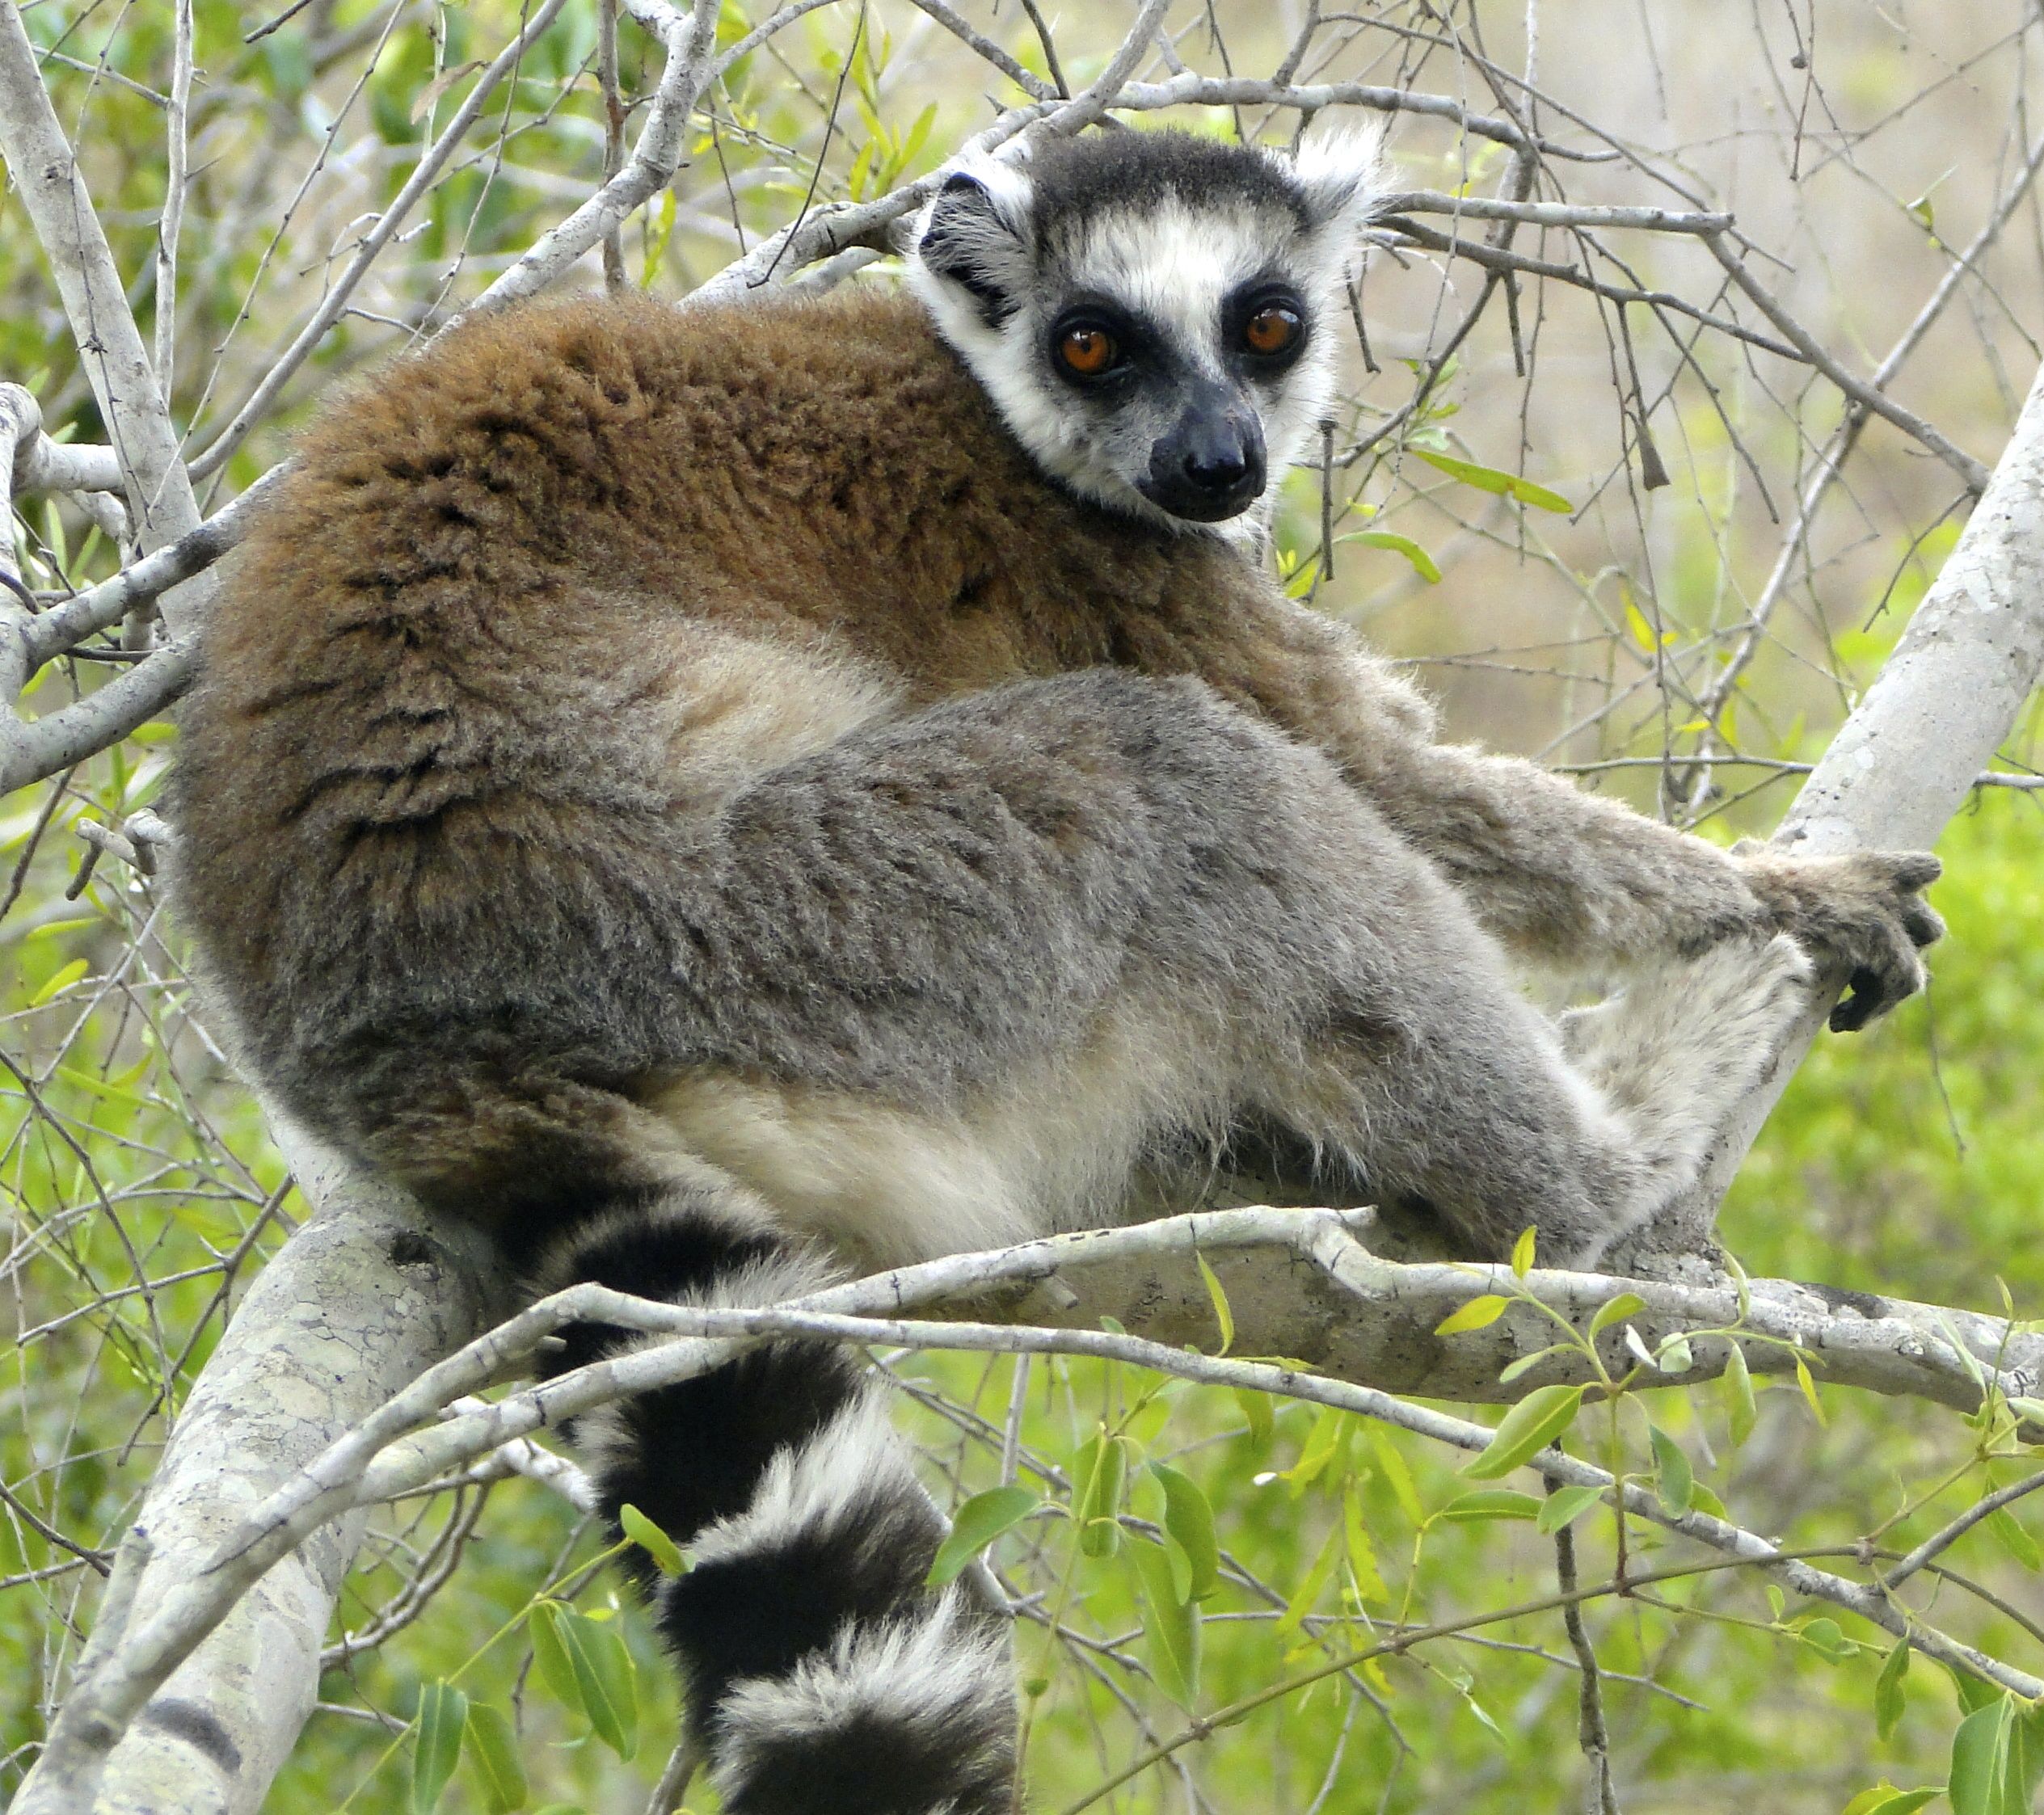 The pretty ring-tailed lemur is ready to strike a pose for your ...